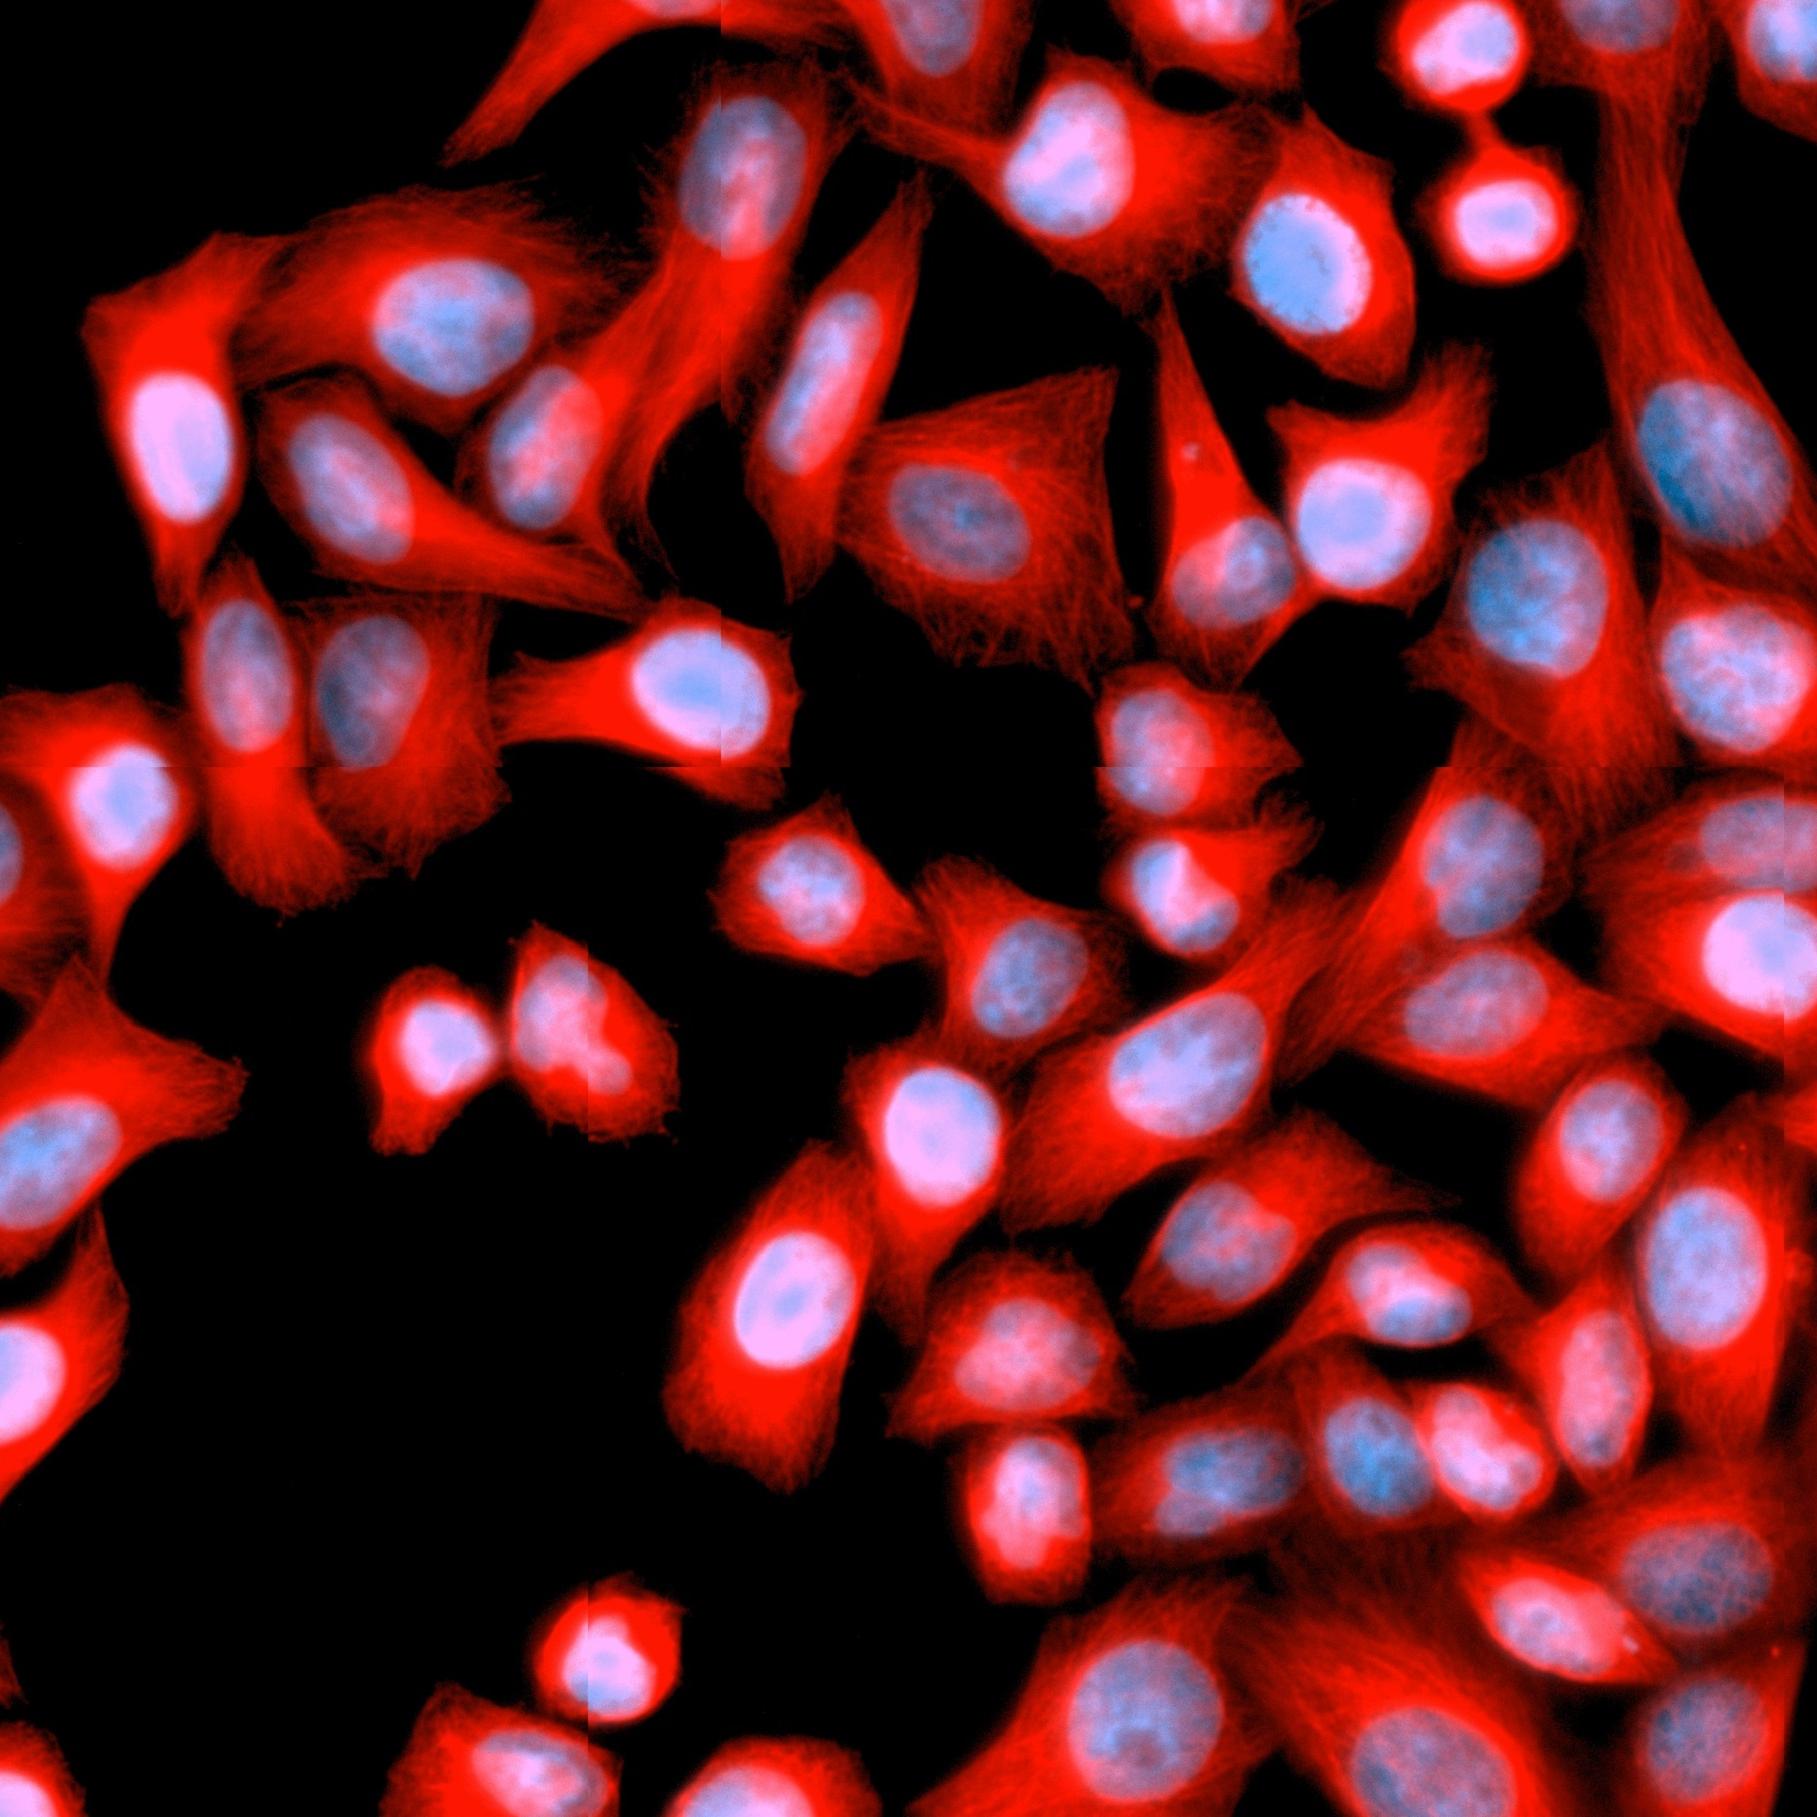 Control HeLa cells stained with DAPI (blue) and anti-tubulin antibody (red) and imaged with ZEISS Celldiscoverer 7.